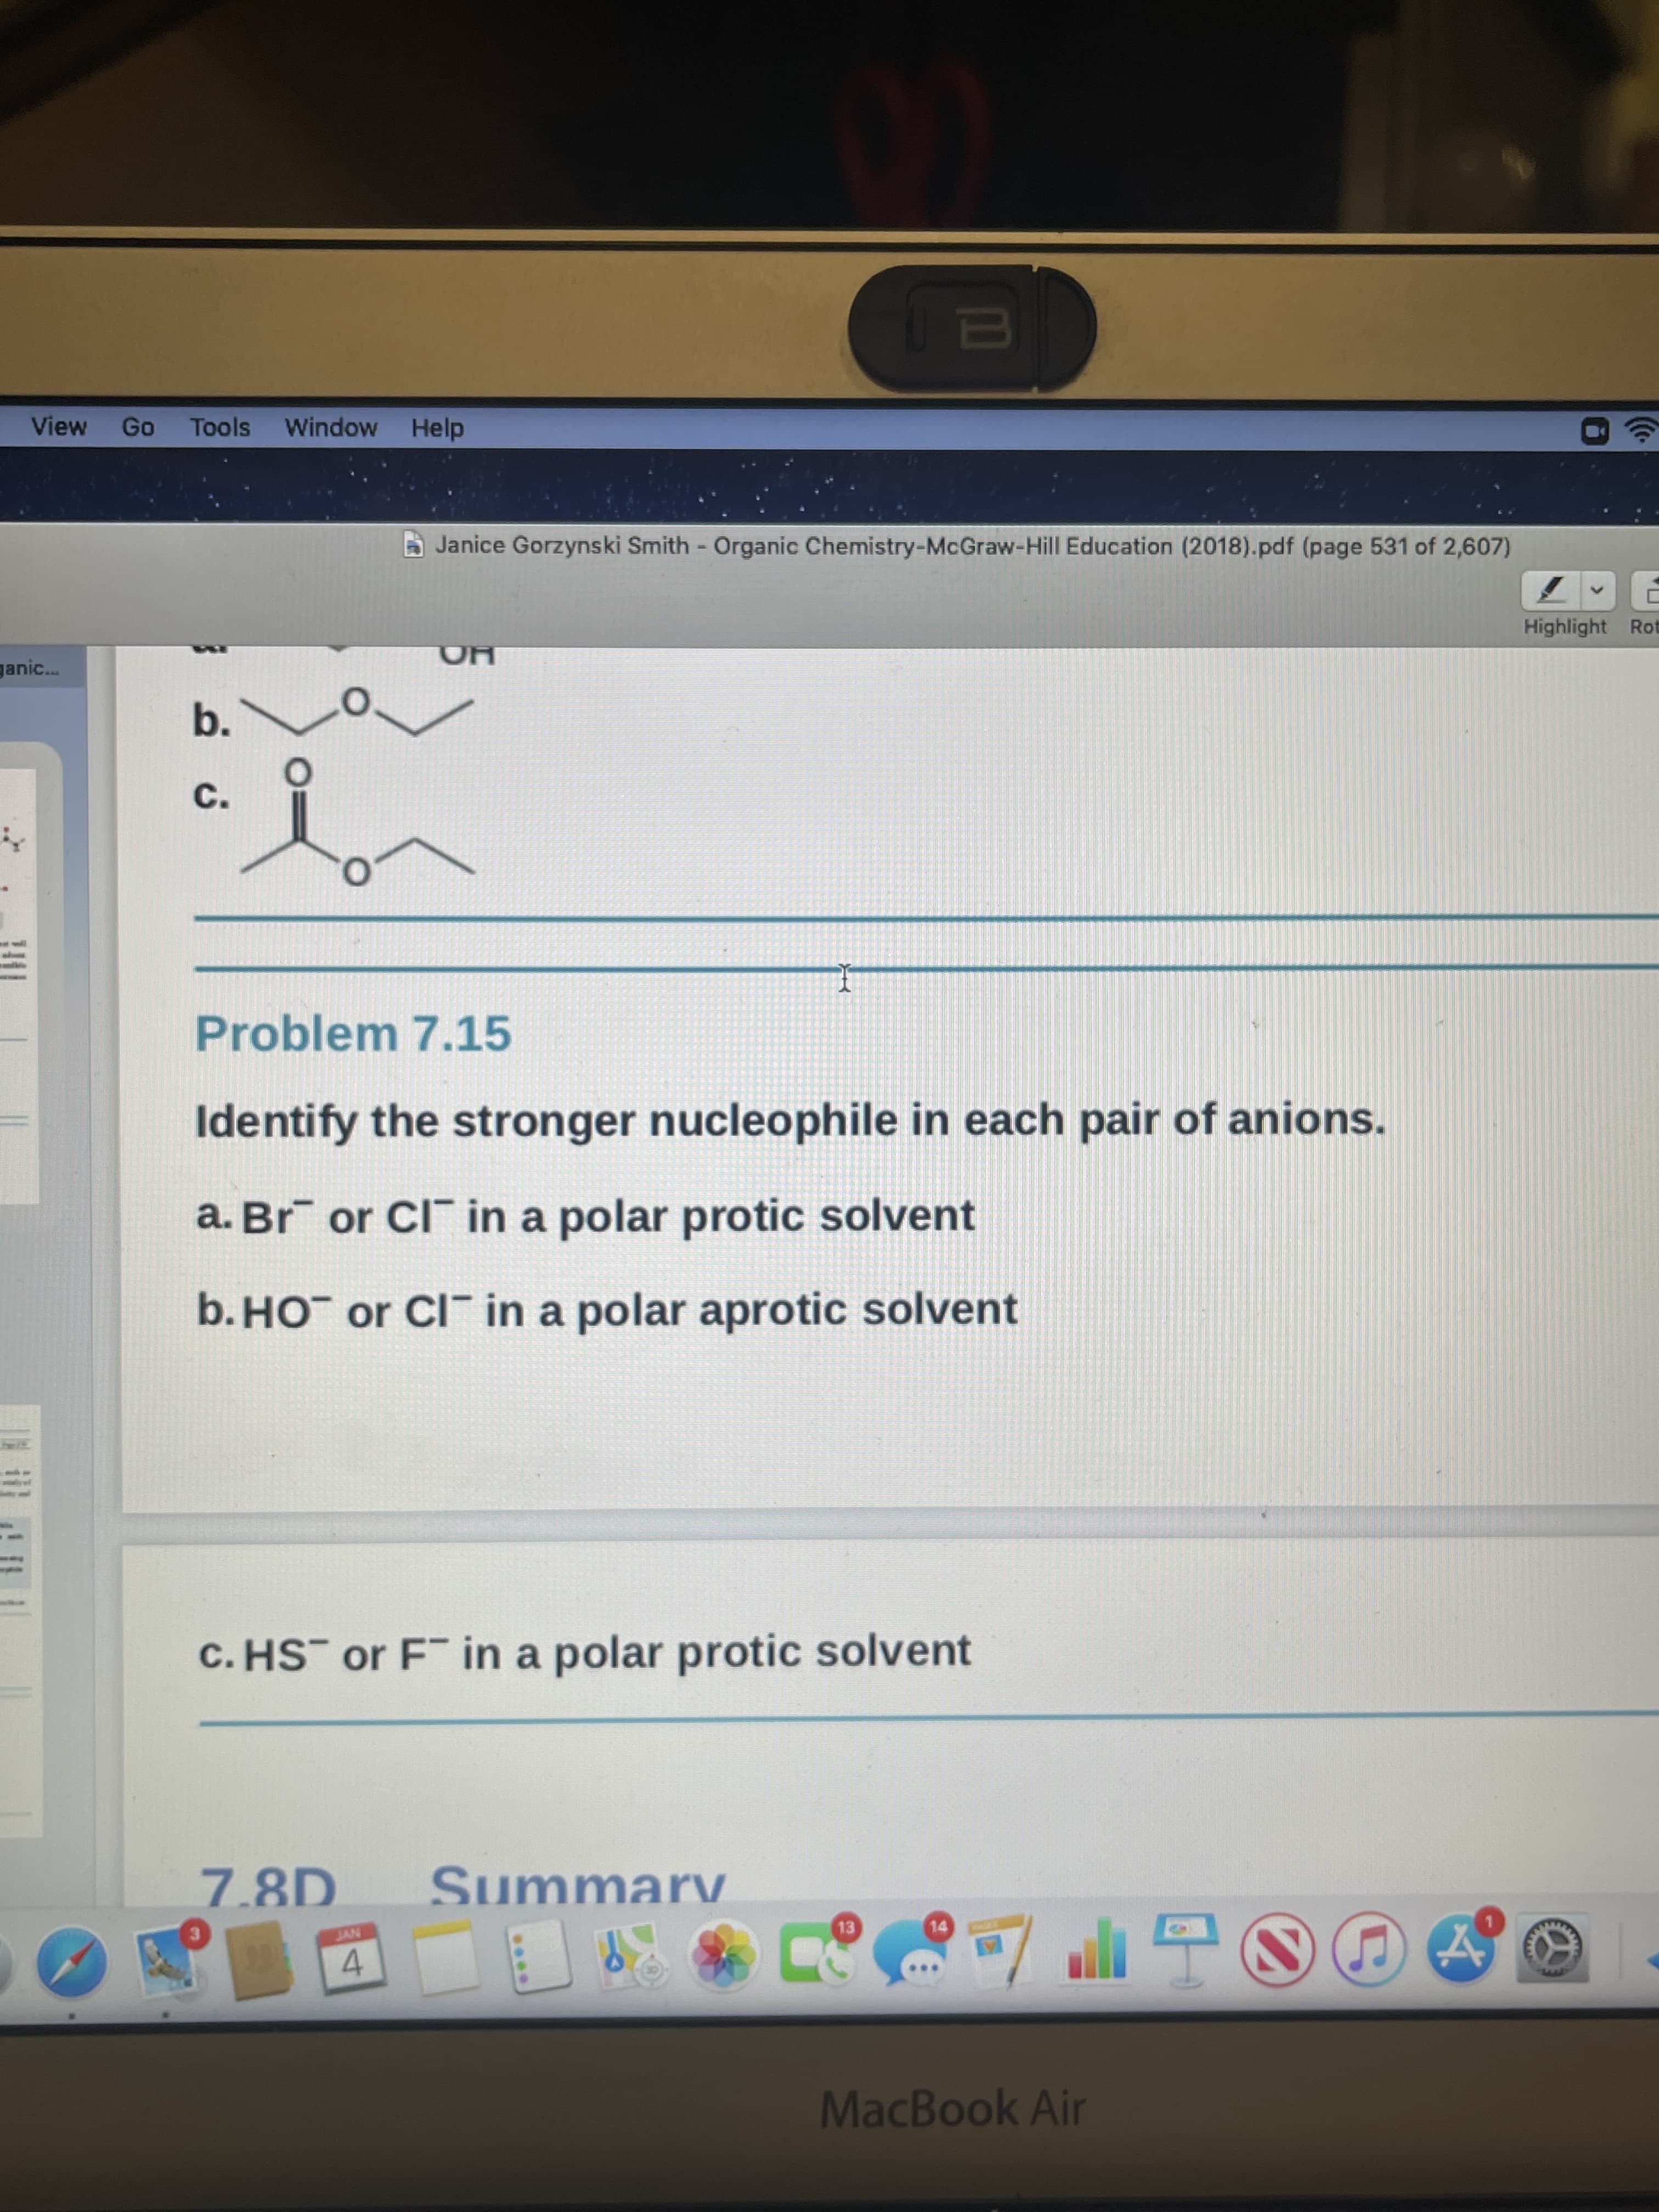 ....
View
Tools
Window Help
Janice Gorzynski Smith - Organic Chemistry-McGraw-Hill Education (2018).pdf (page 531 of 2,607)
Highlight Ron
ganic..
HO
b.
c.
Problem 7.15
Identify the stronger nucleophile in each pair of anions.
a. Br¯ or CI¯ in a polar protic solvent
b.HO¯ or CI in a polar aprotic solvent
C. HS or F in a polar protic solvent
Summarv
NYT
3.
4.
MacBook Air
